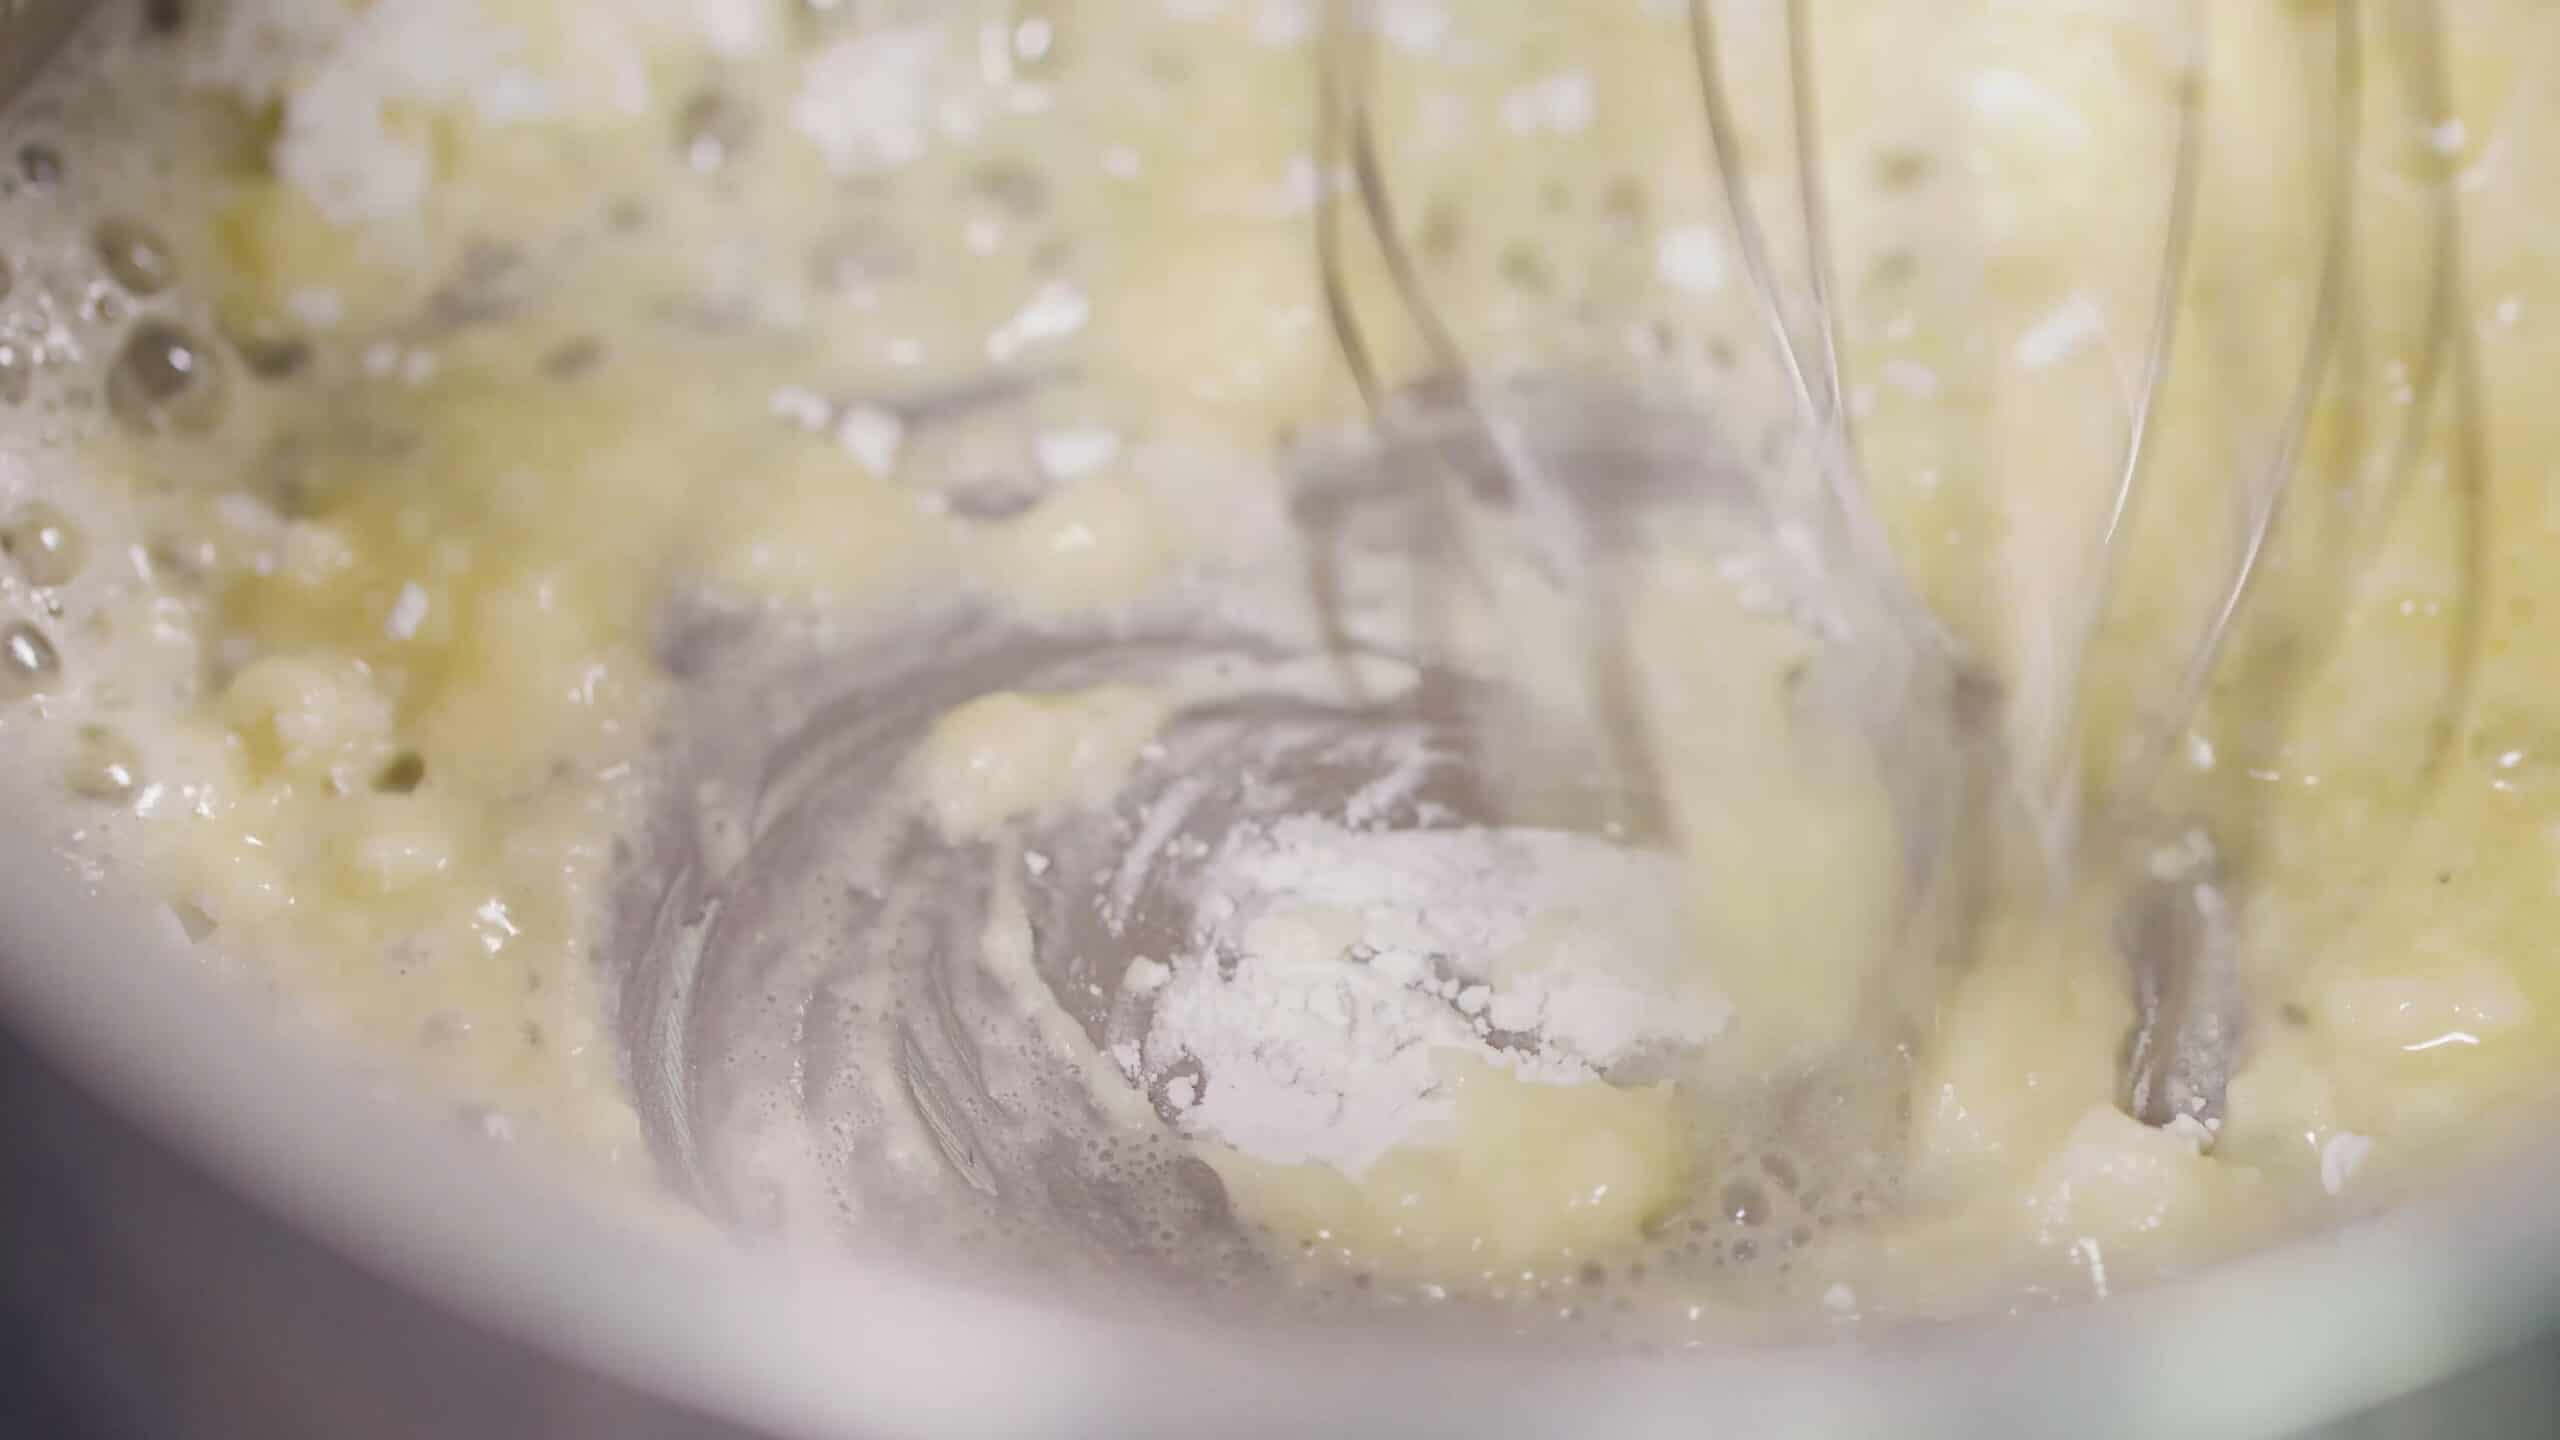 Close-up view of silver pot with melted butter and cornstarch with a wire whisk used to combine.